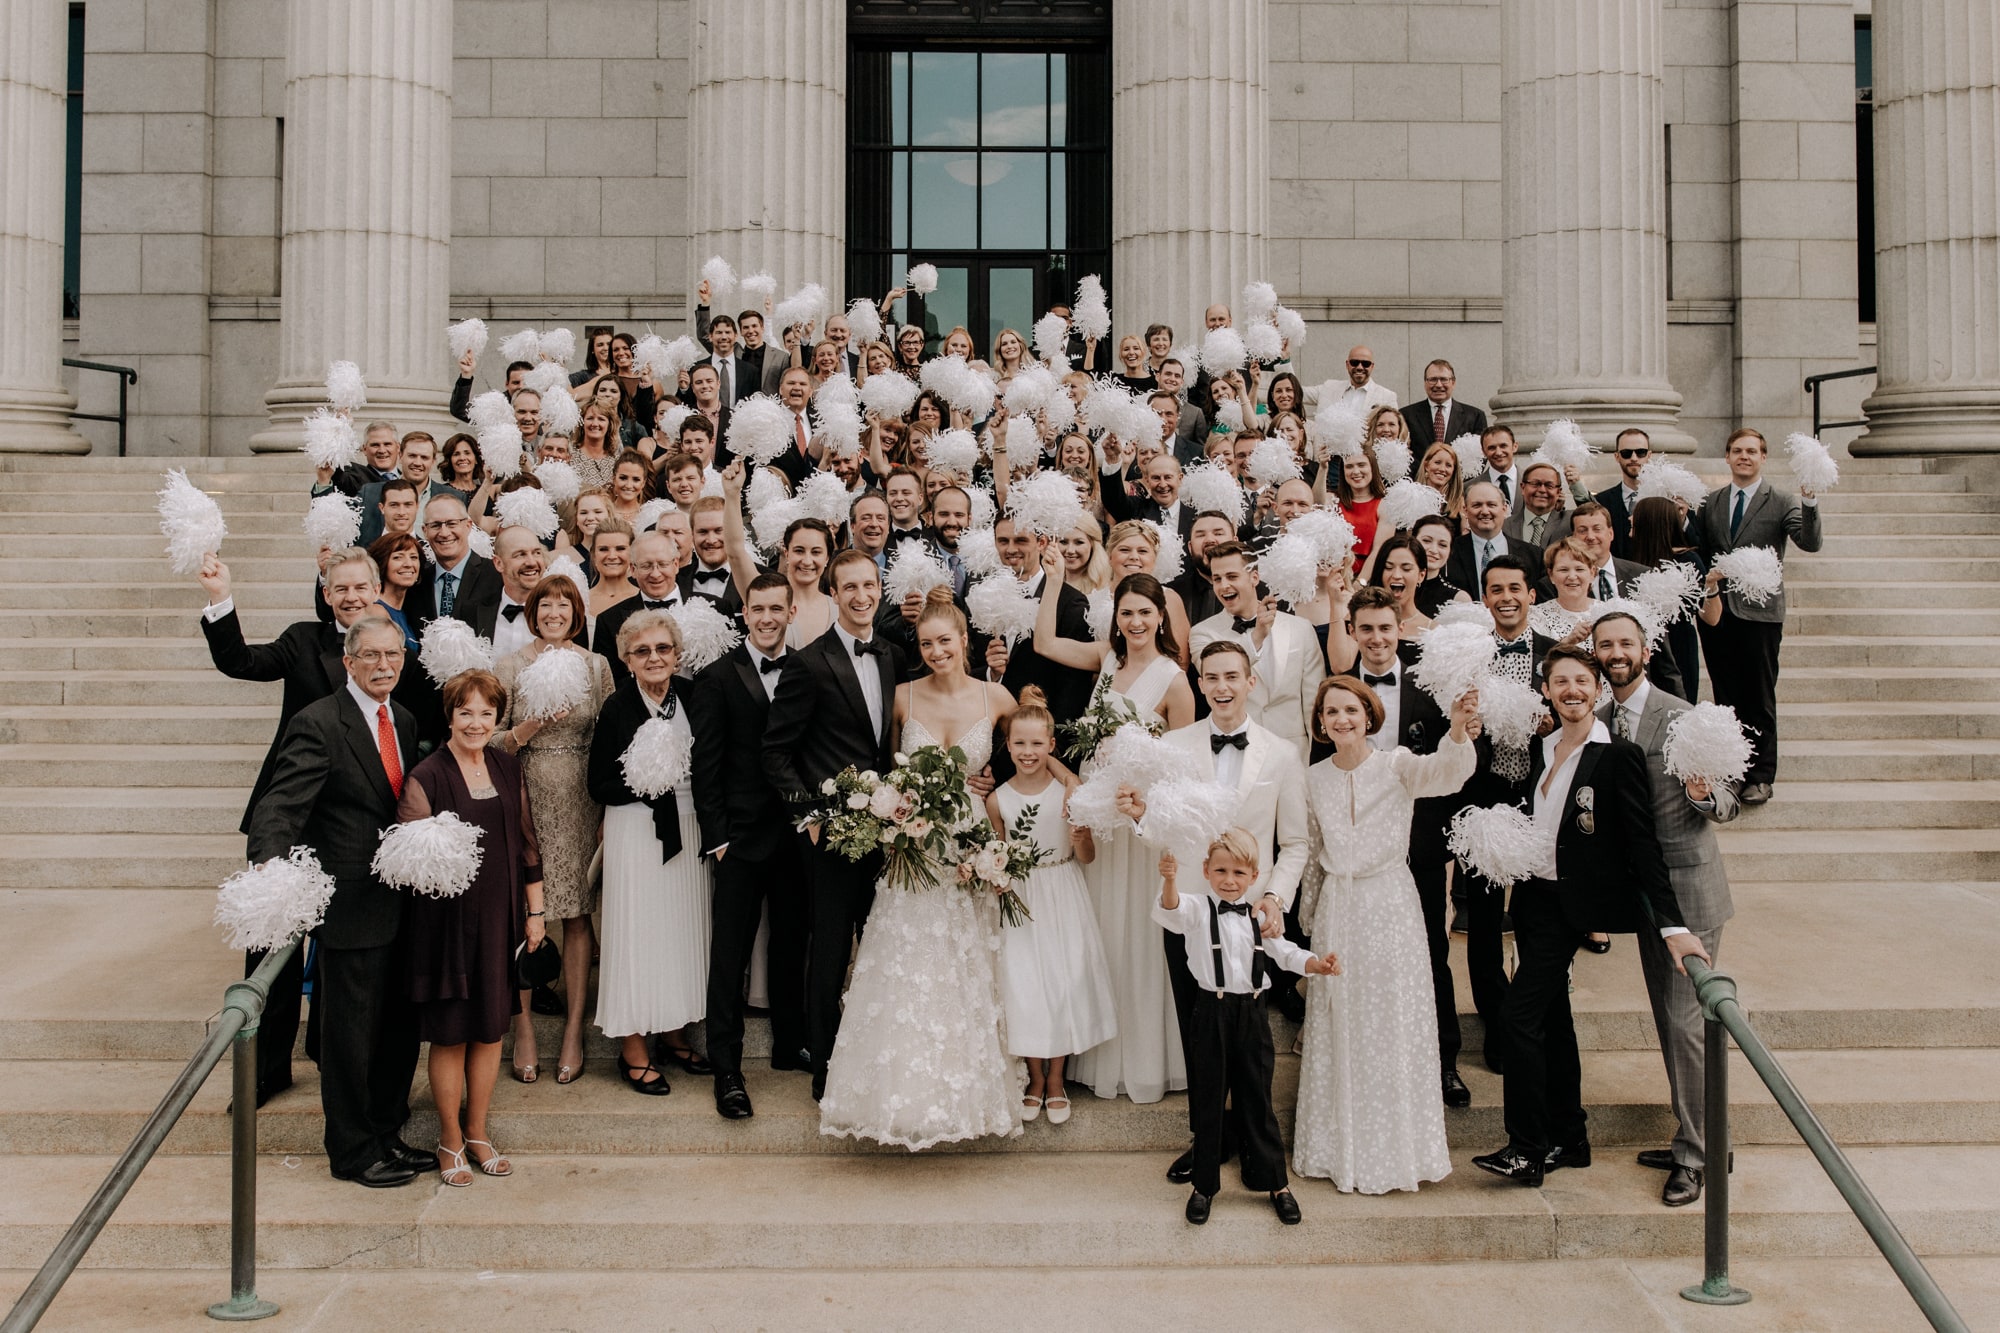 A large group of family and friends gather on the stairs of the Minneapolis Institute of Art for wedding photos with J.Olson Weddings.